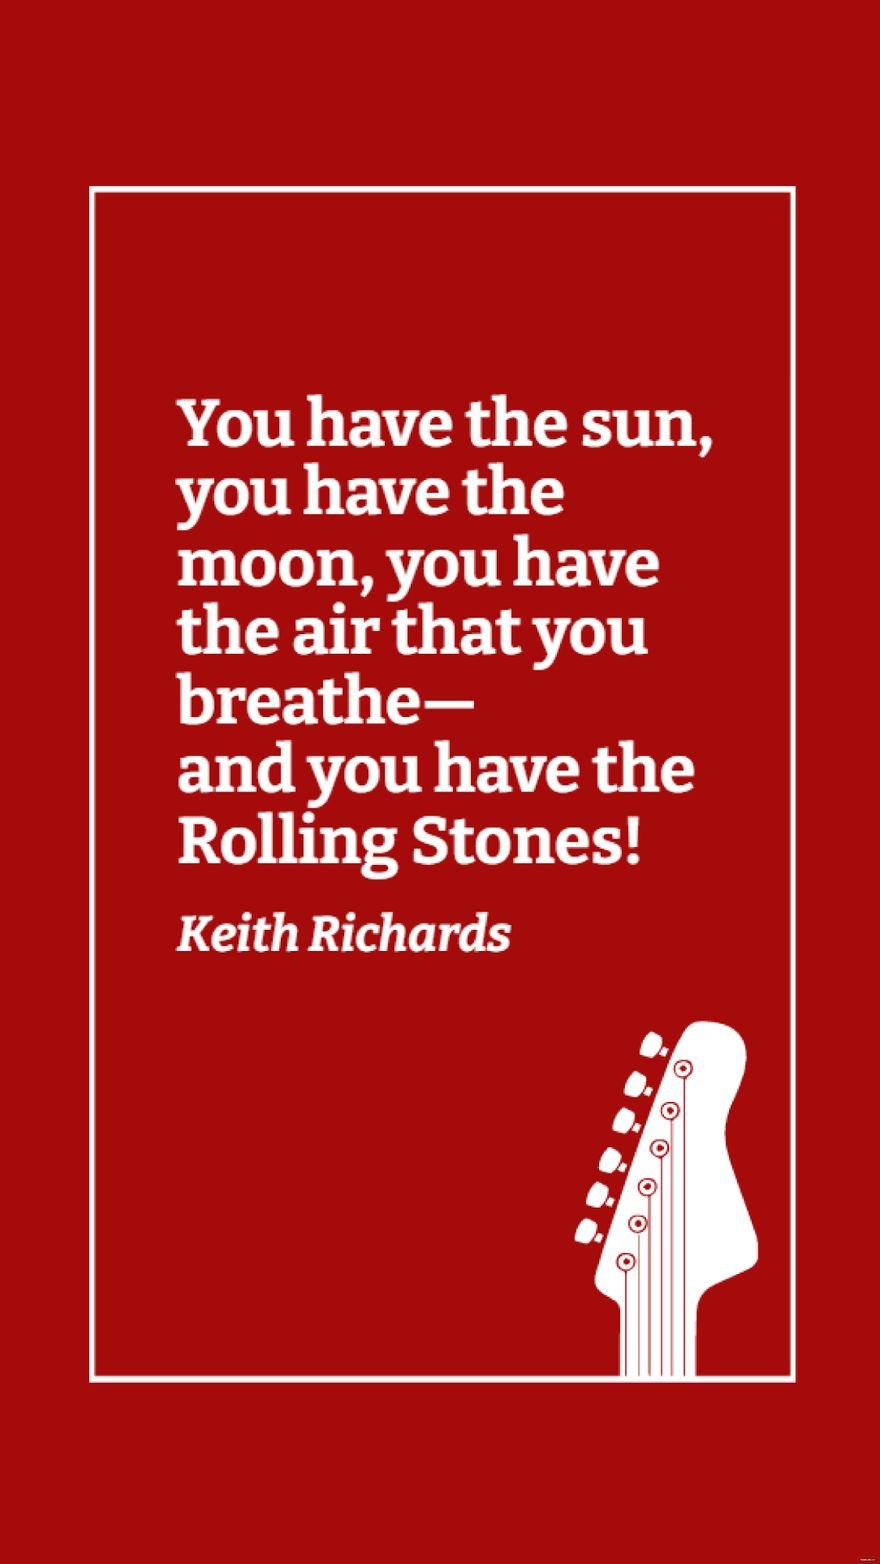 Keith Richards - You have the sun, you have the moon, you have the air that you breathe - and you have the Rolling Stones!